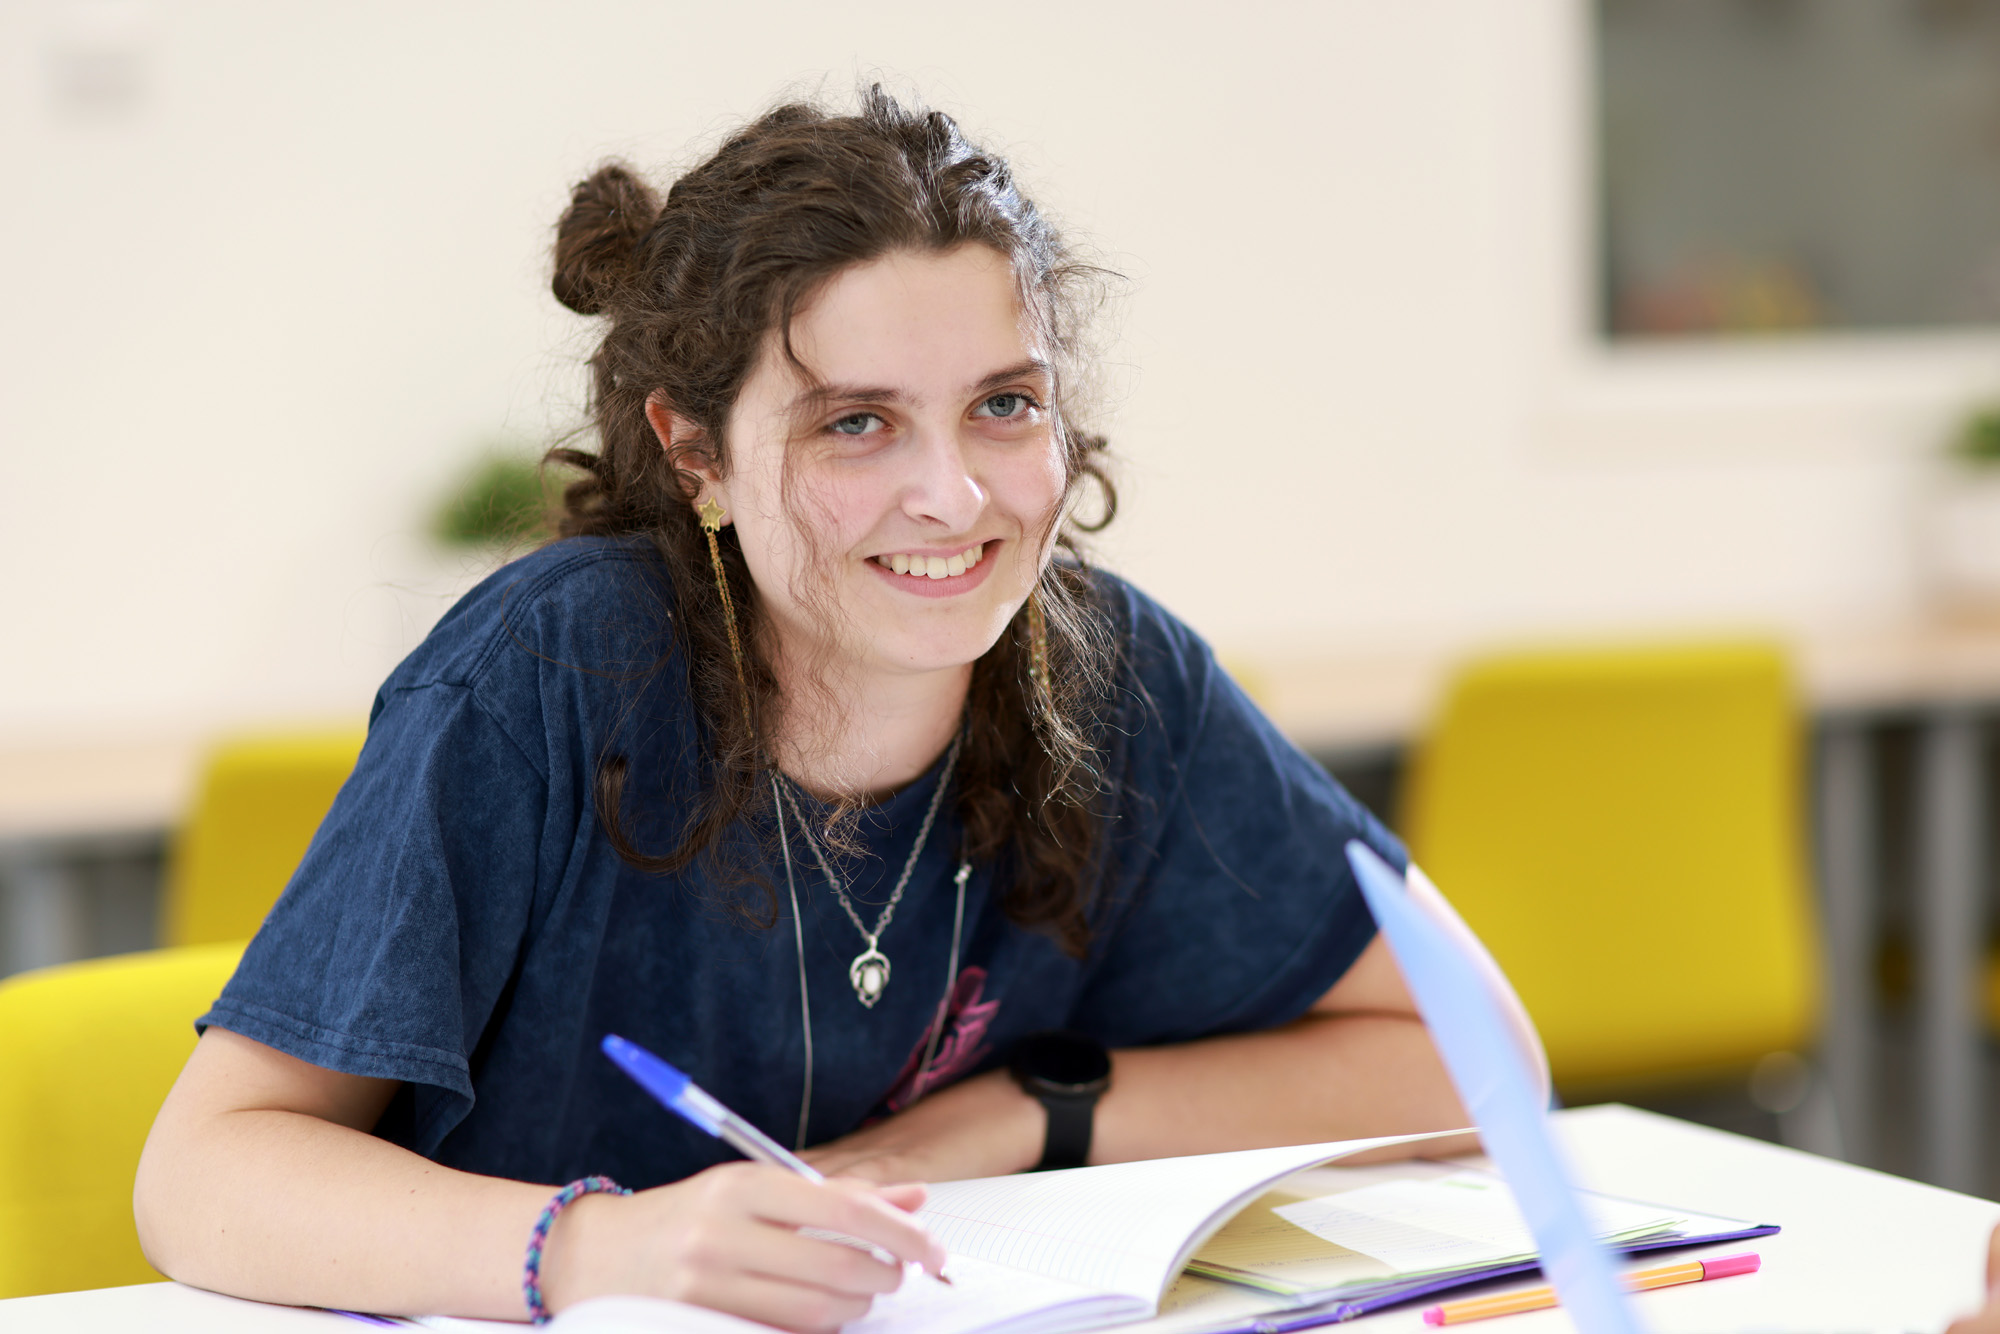 Sixth form courses guide